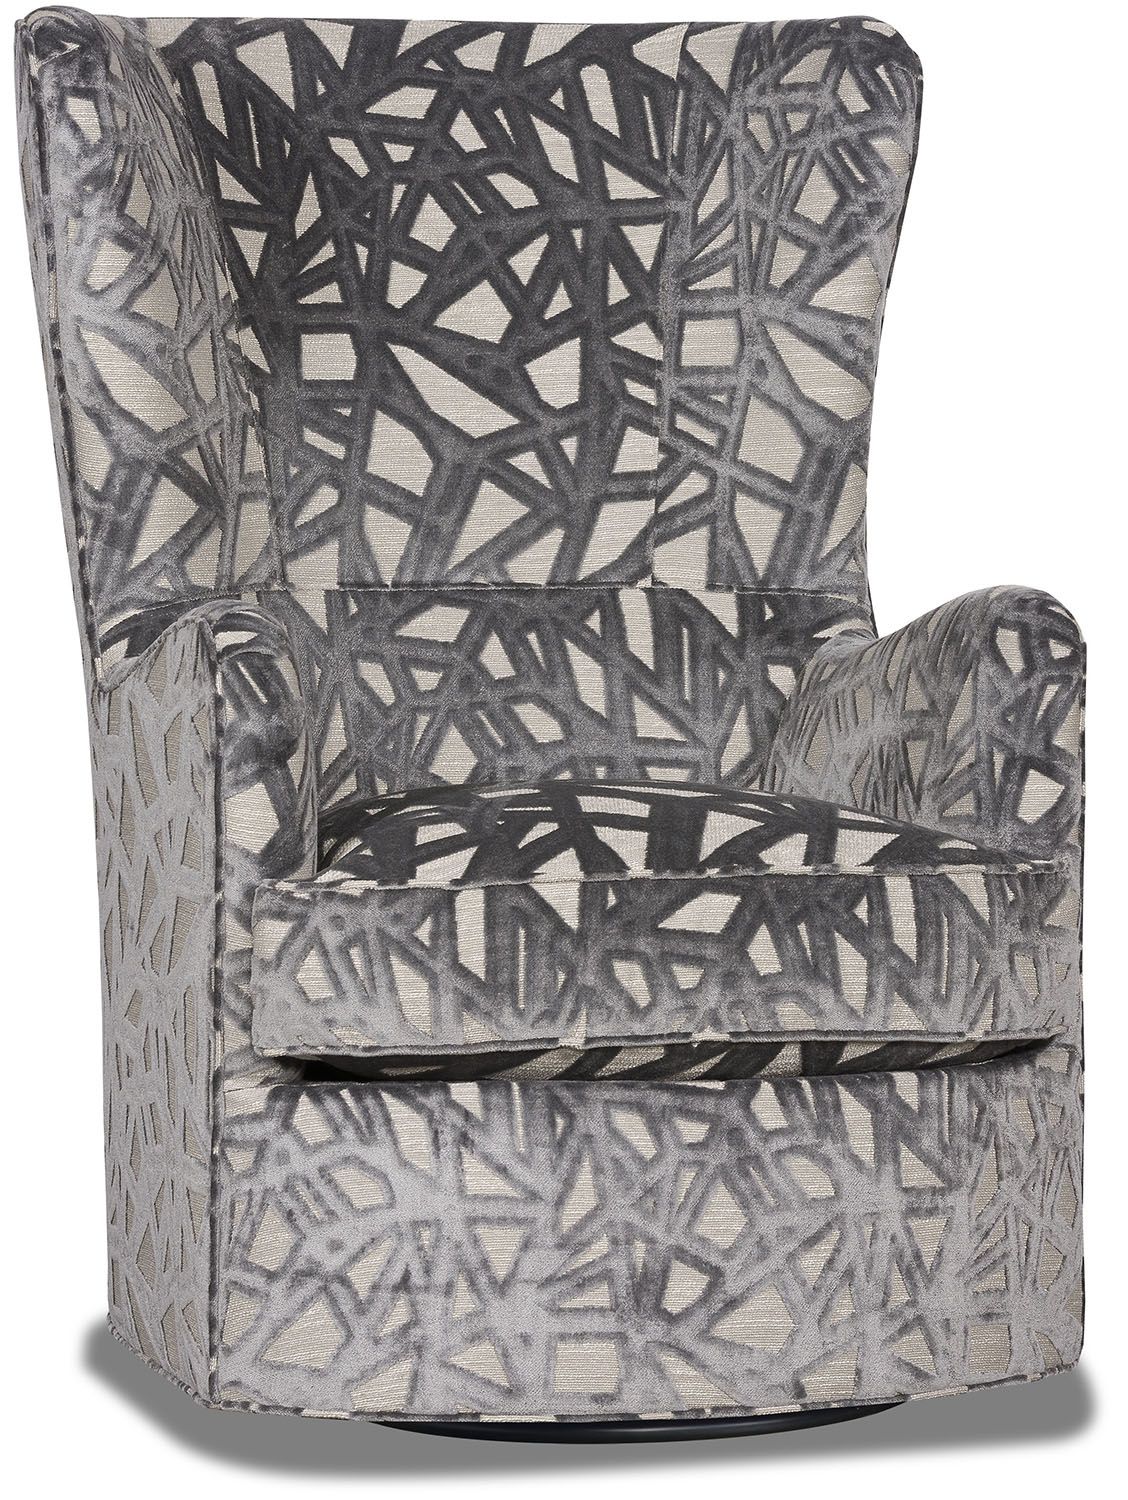 super soft chair that invites you to unwind and relax in style